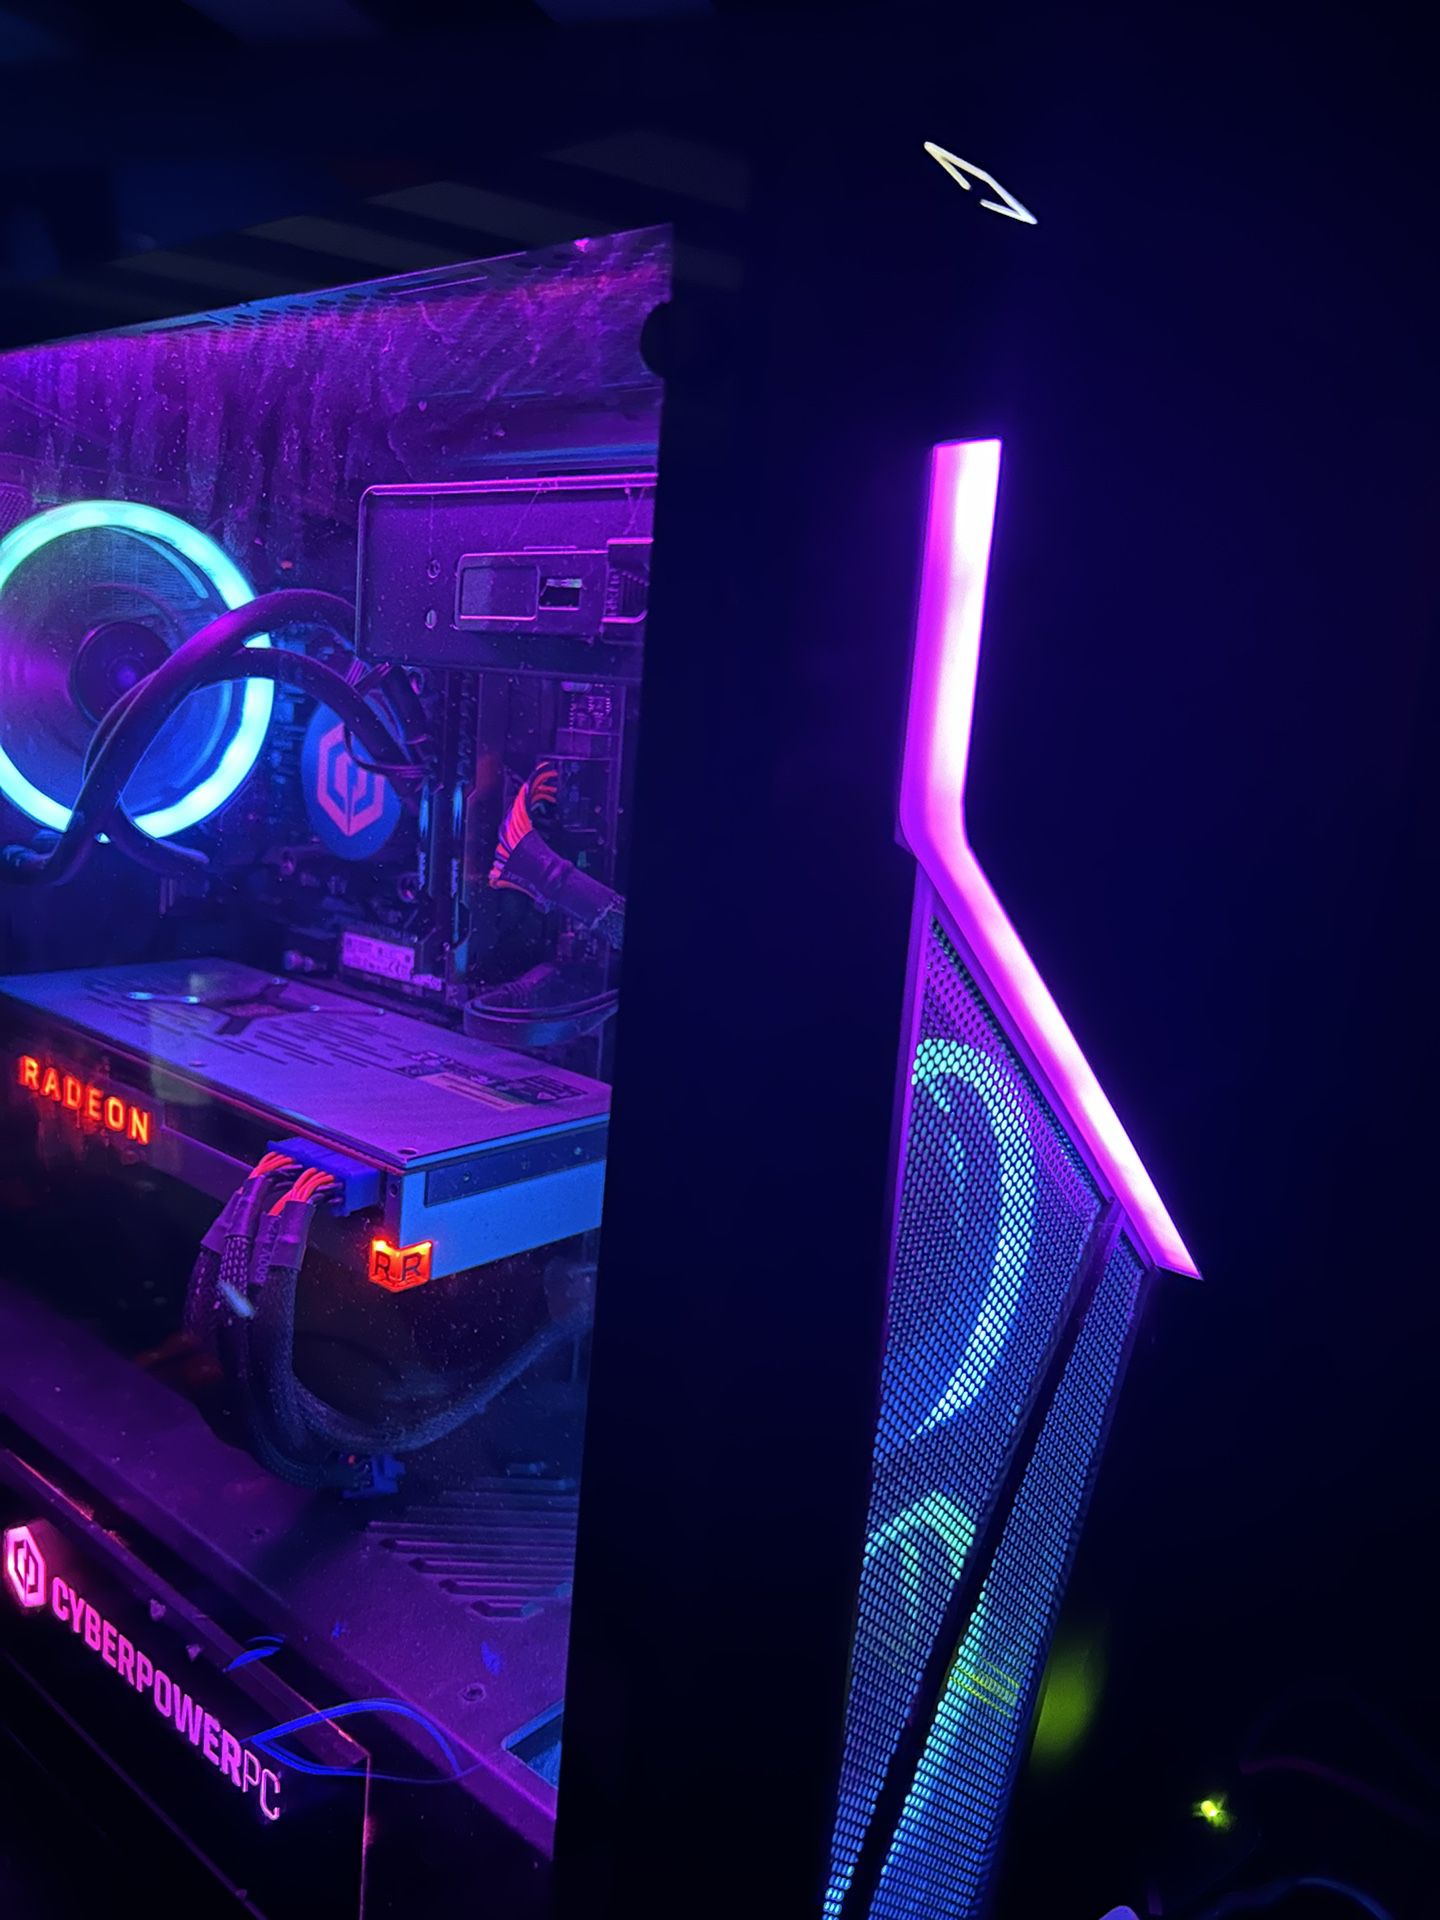 CyberPower Pc With Radeon VII VR Ready 